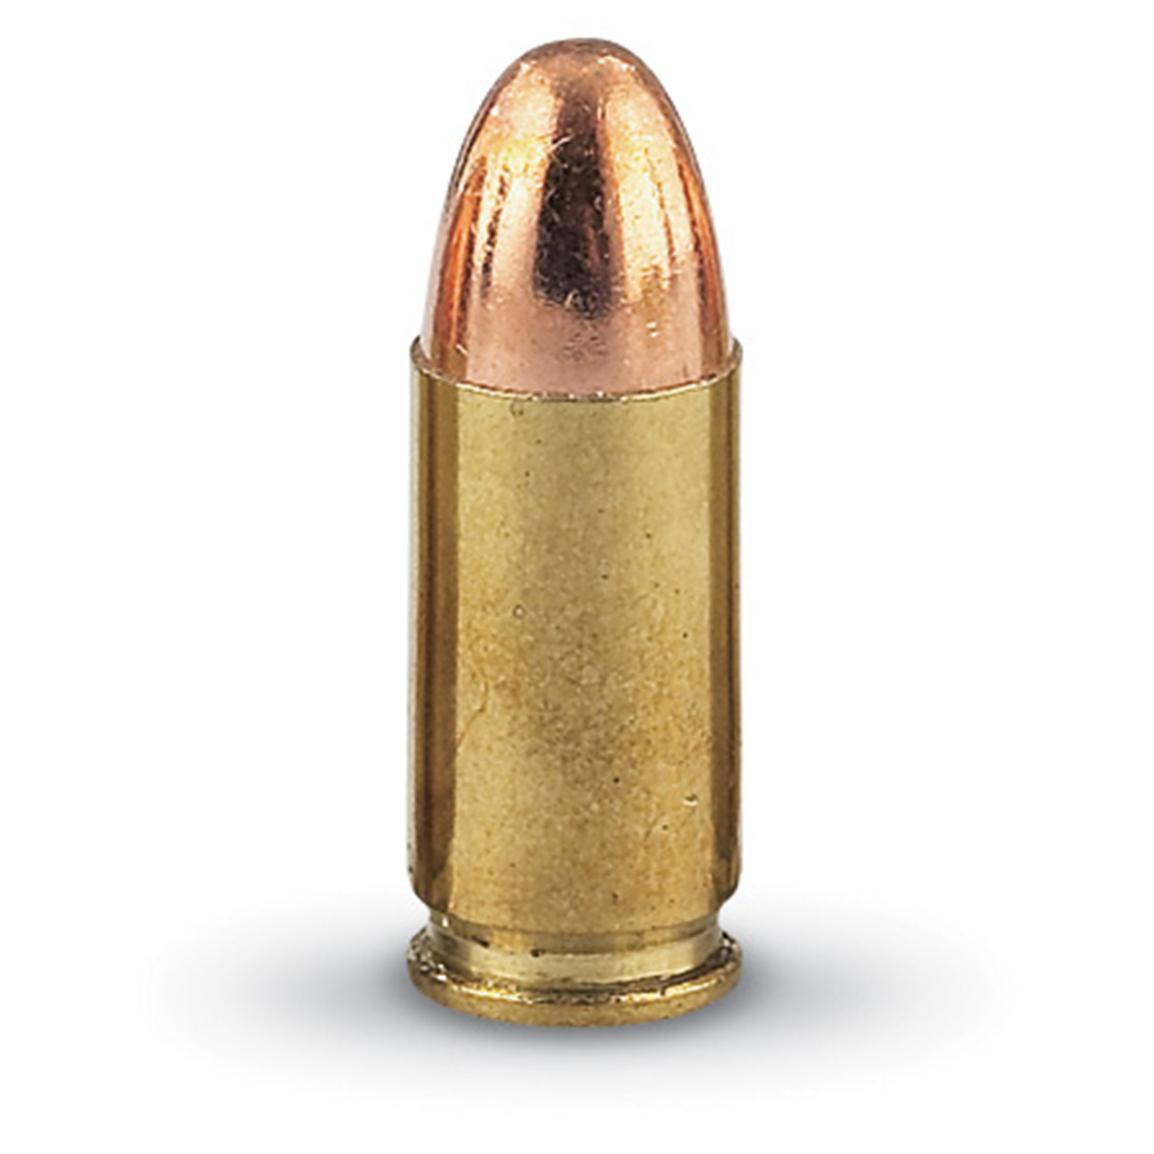 250 rds. 9 mm 115 - gr. FMC Ammo - 131402, 9mm Ammo at Sportsman's Guide